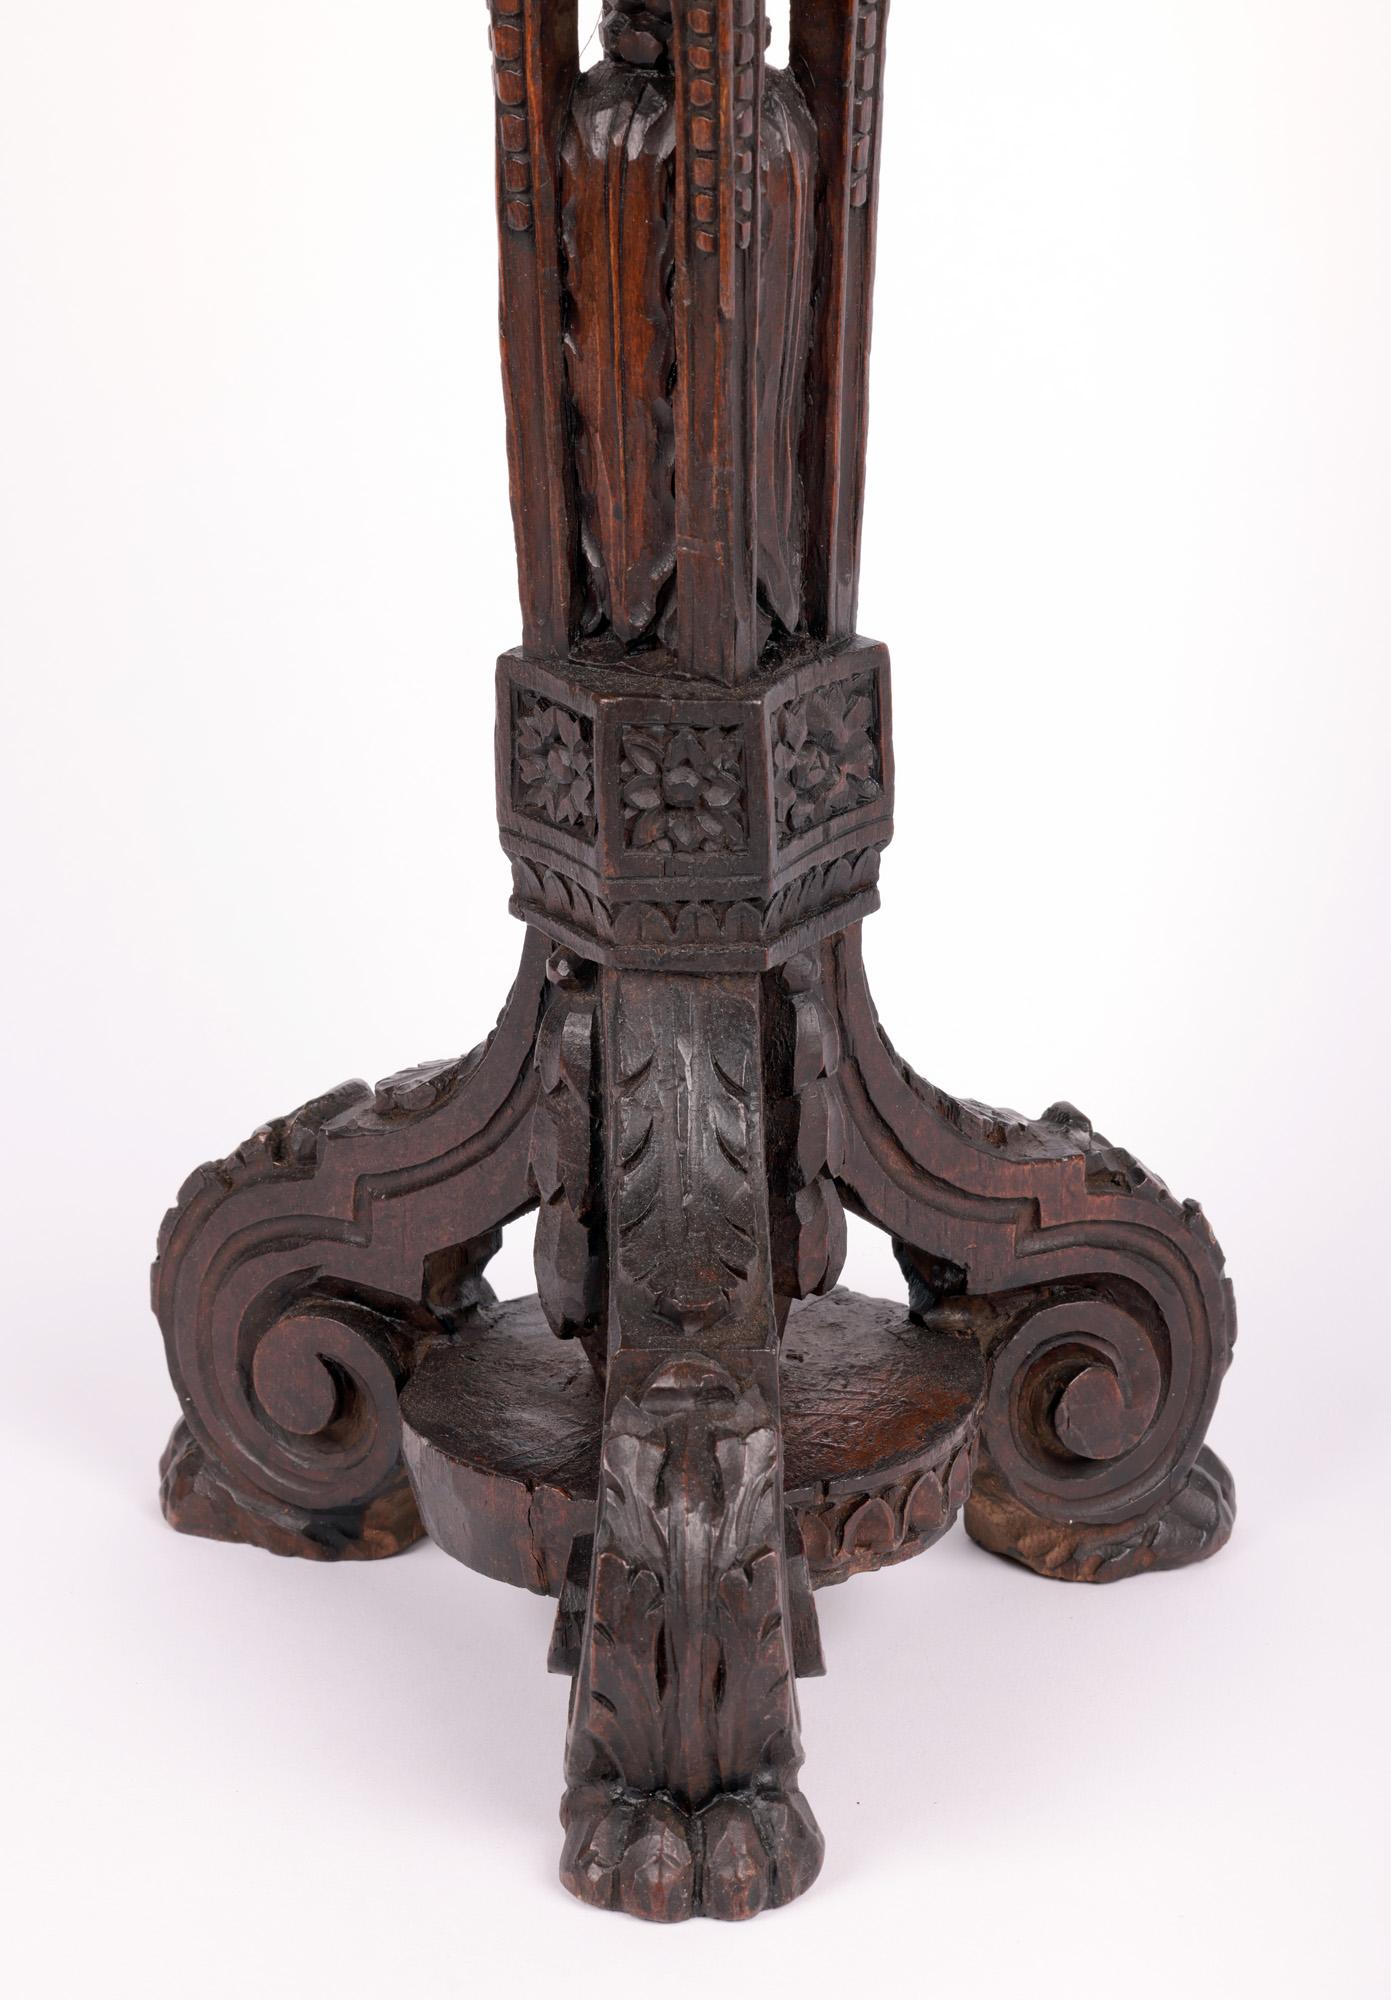 Dutch Flemish Carved Pricket Candlestick with Putti Late 16th or Early 17th Century For Sale